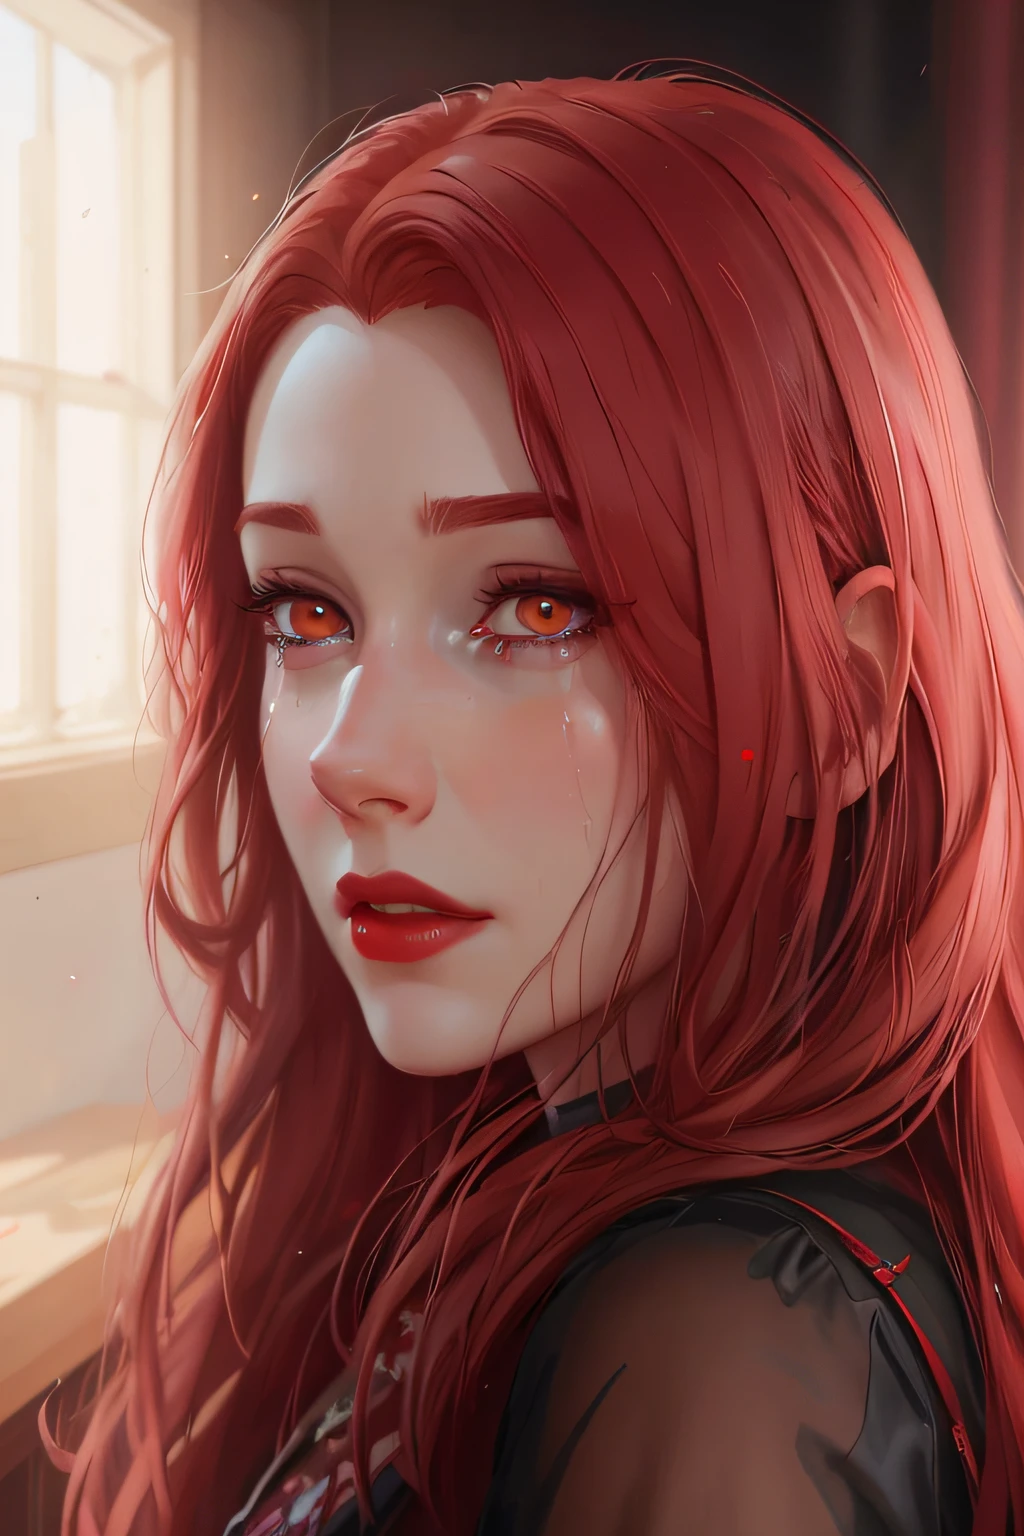 A closeup of a sad woman with crying red hair wearing red lipstick, 4K realistic digital art, 4K realistic digital art, realistic art style, RossDraws portrait, realistic art style, photorealistic art style, realistic digital painting, in Bowater art style, 4k highly detailed digital art, Guweiz style art